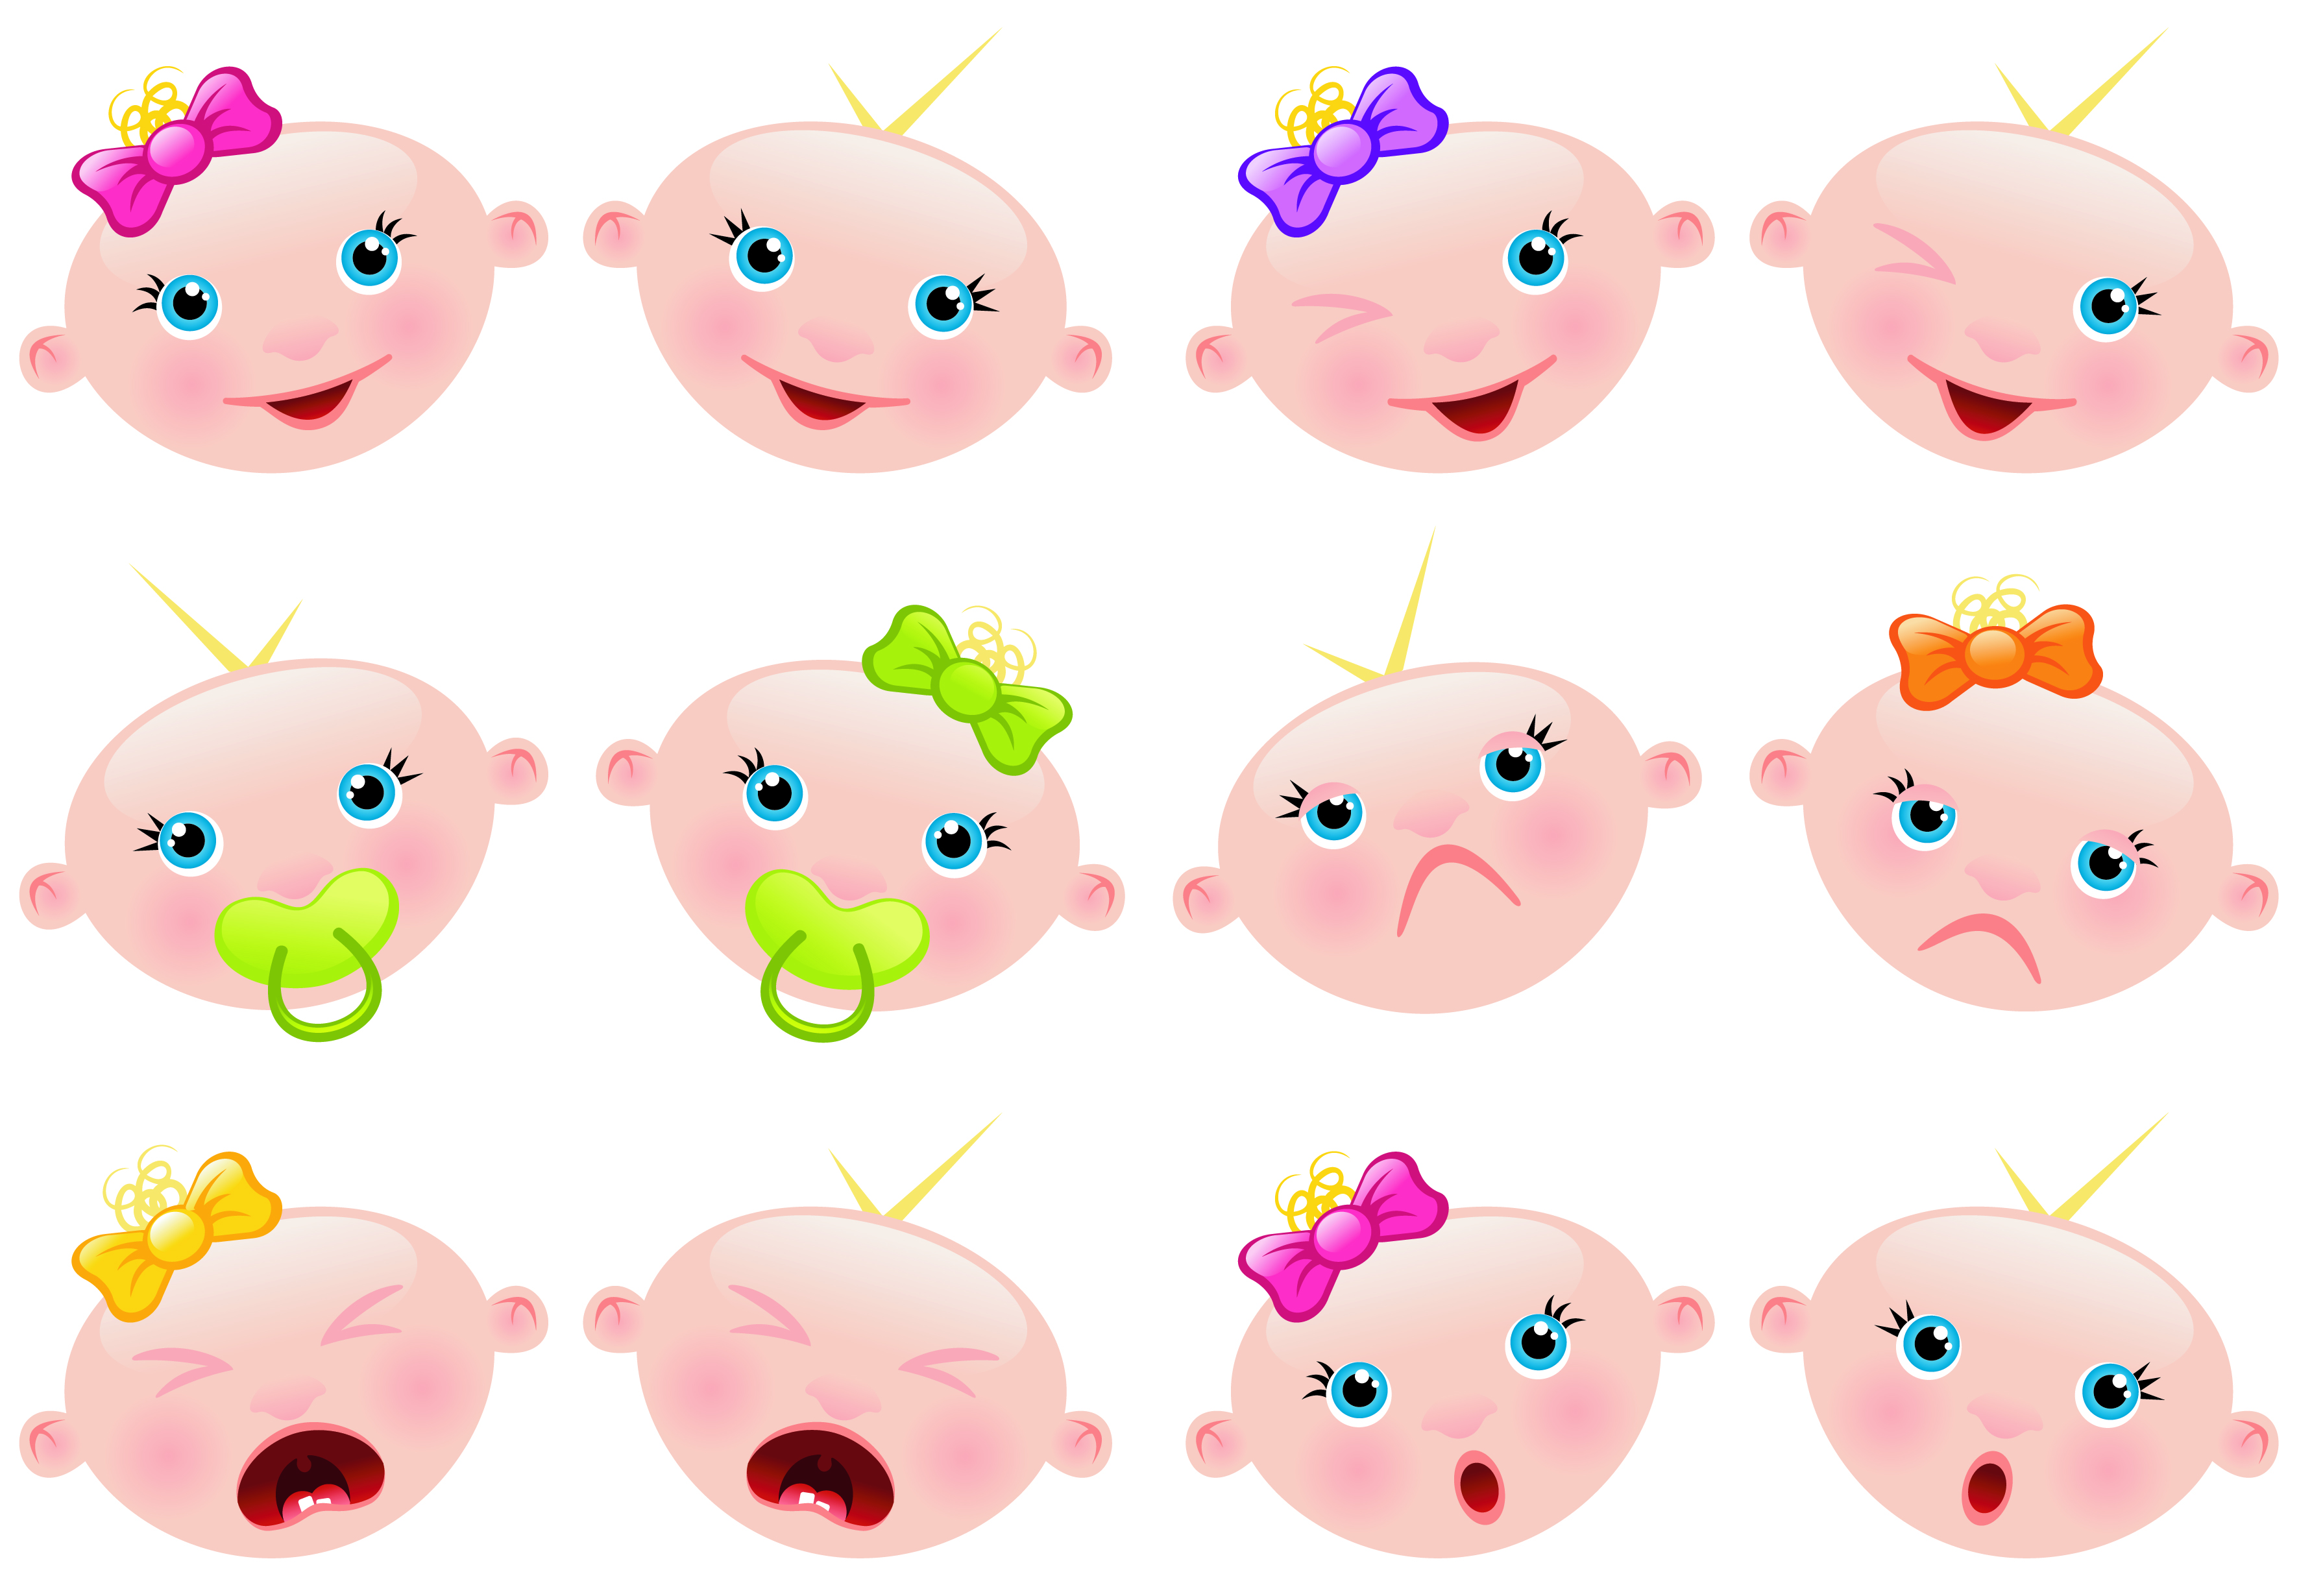 Cute baby picture clip art Free Vector / 4Vector